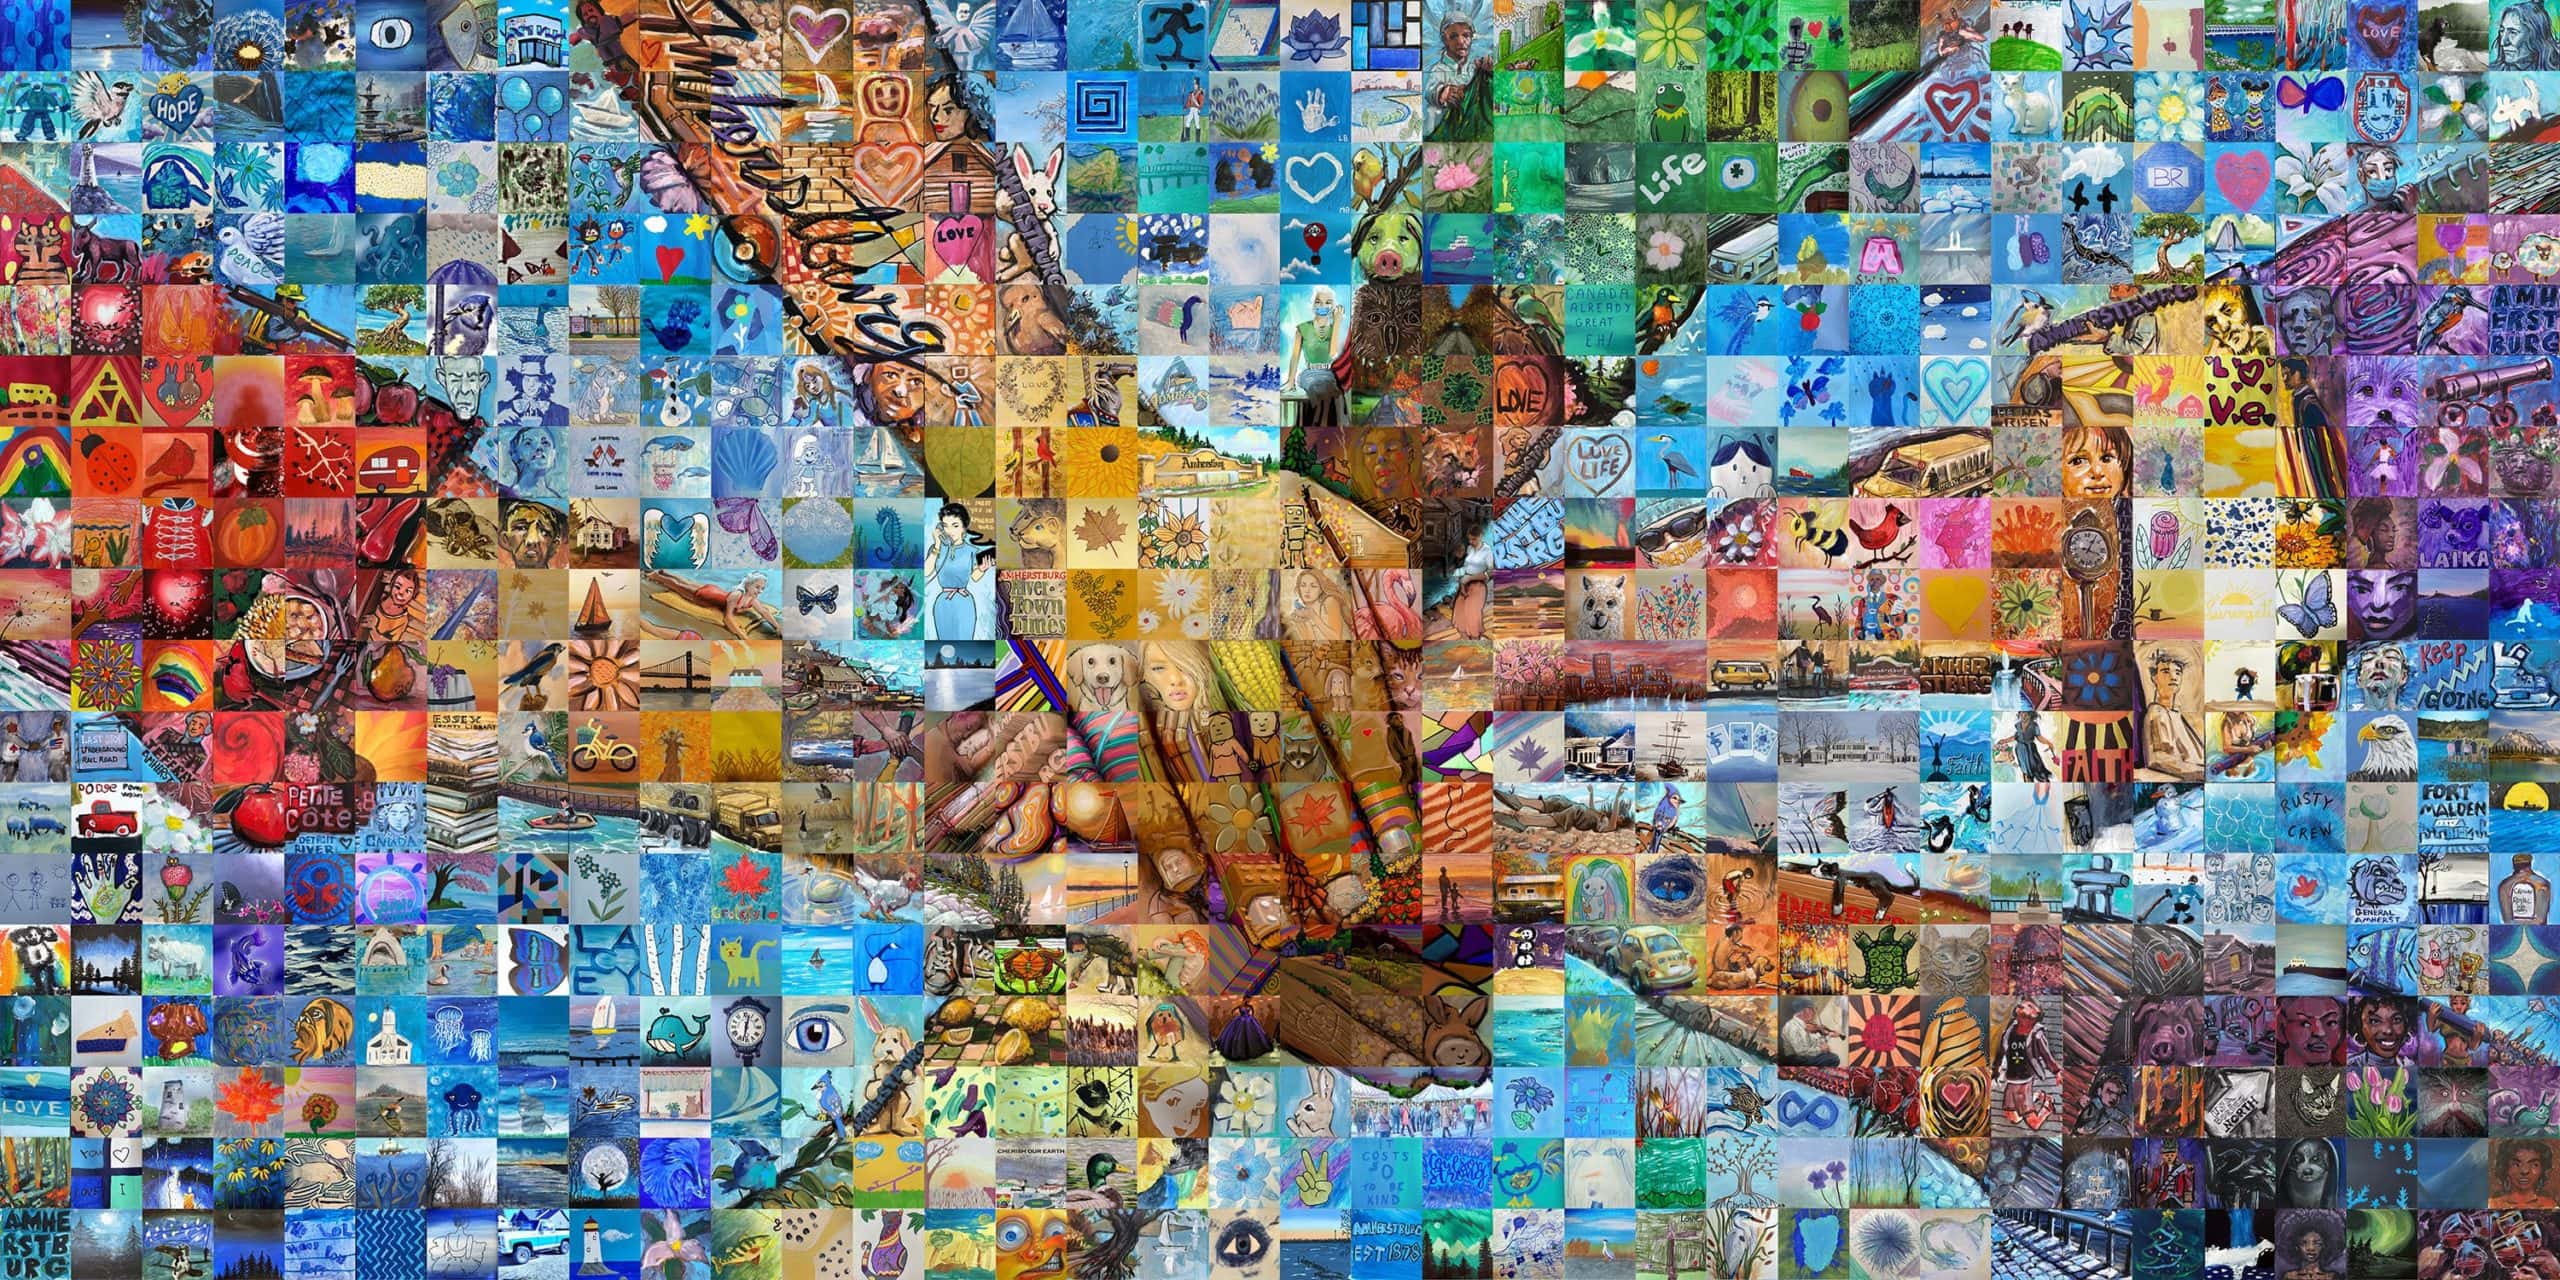 Amherstburg's Community Mosaic Mural depicts stacked hands, symbolizing unity.